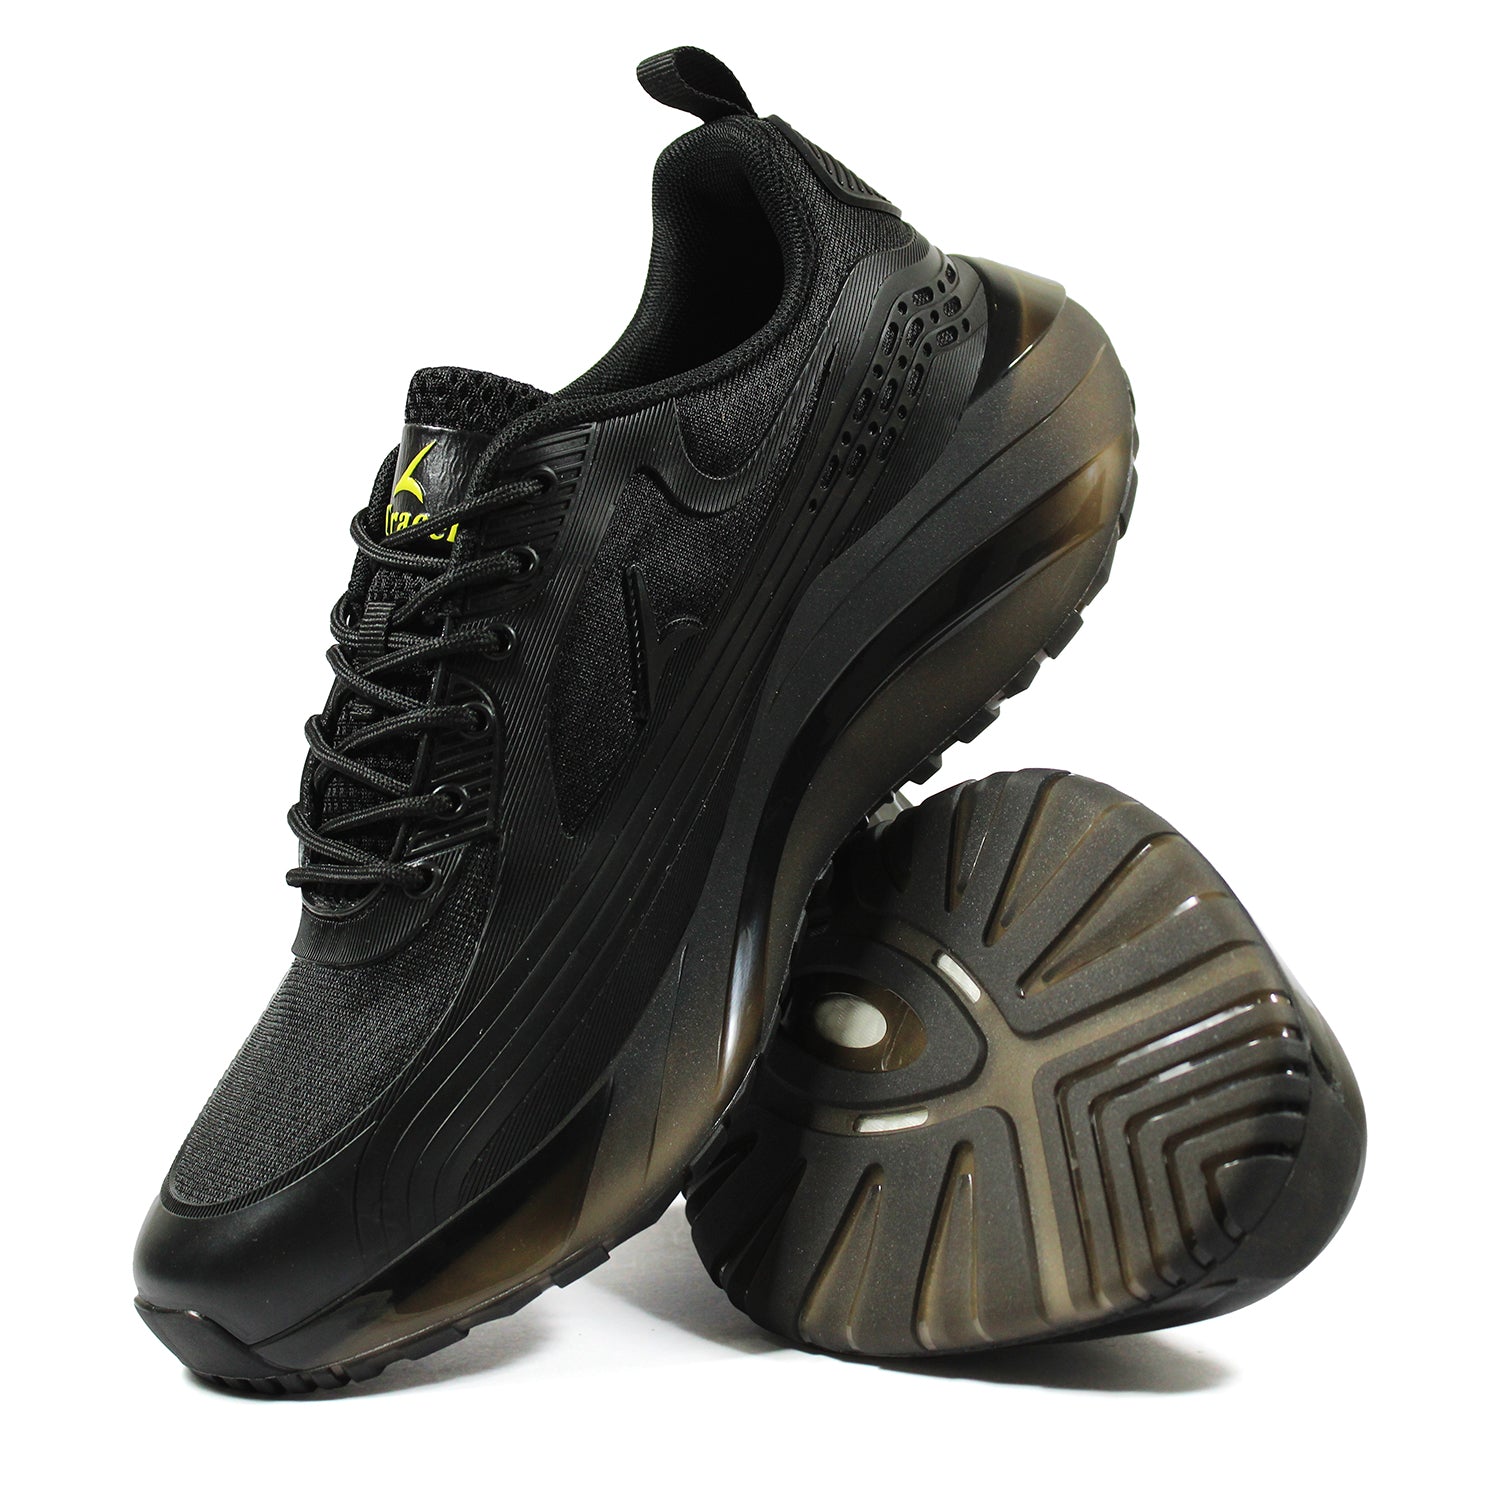 Tracer Shoes | Black Yellow | Men's Collection